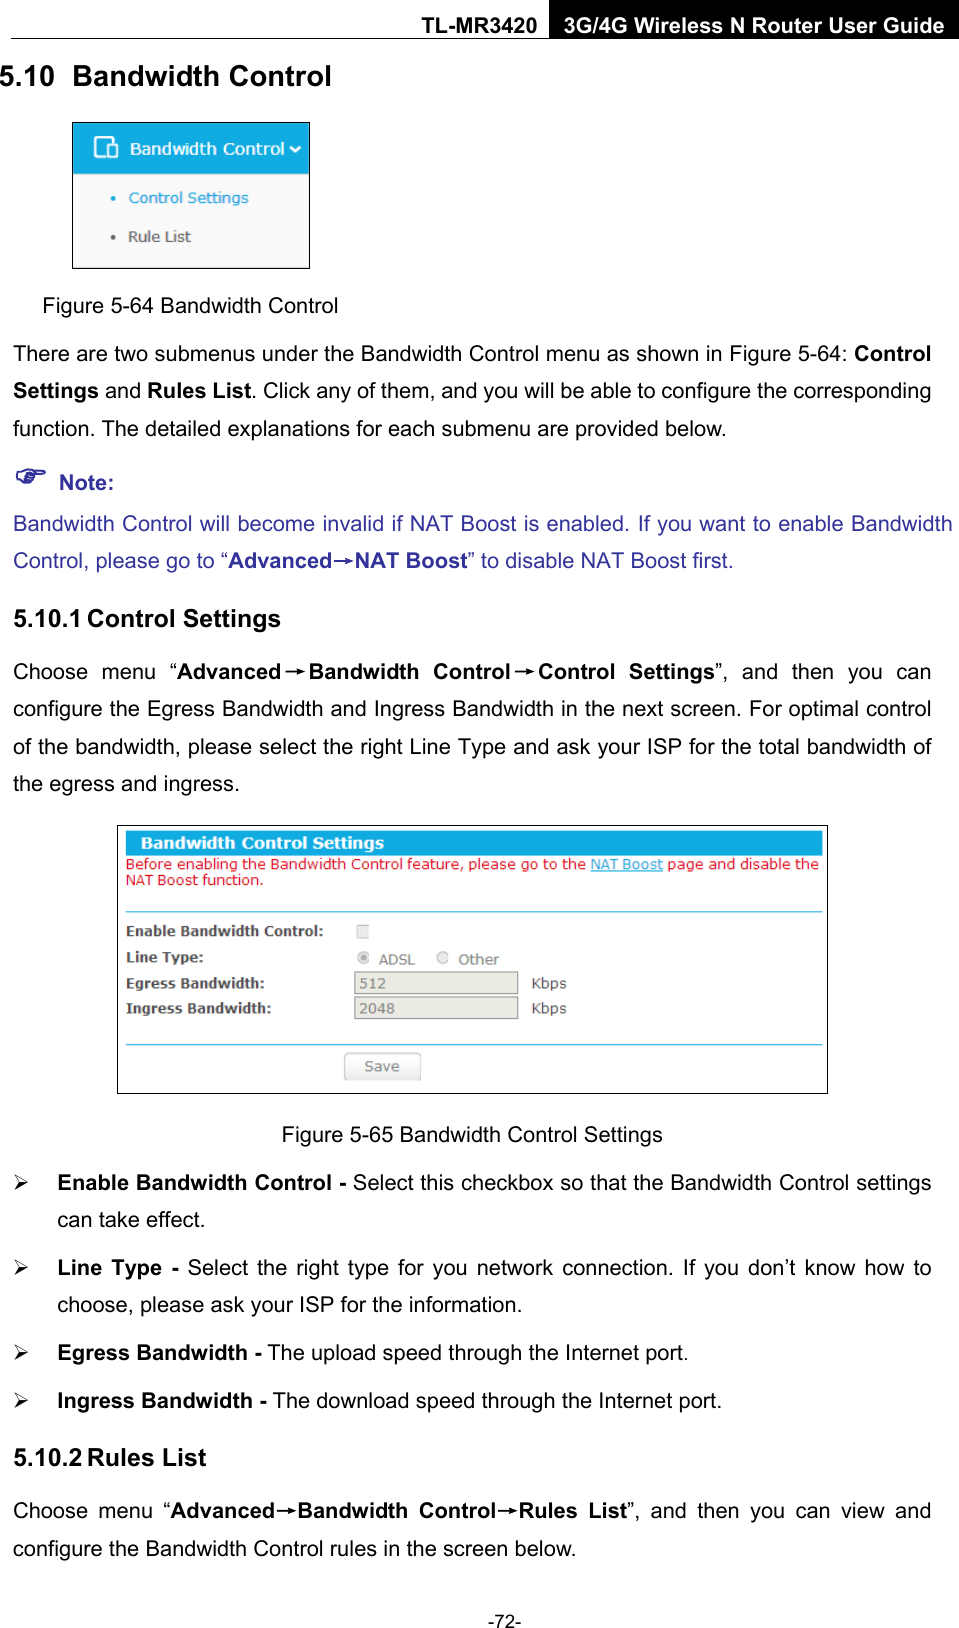    -72- TL-MR3420 3G/4G Wireless N Router User Guide 5.10 Bandwidth Control  Figure 5-64 Bandwidth Control There are two submenus under the Bandwidth Control menu as shown in Figure 5-64: Control Settings and Rules List. Click any of them, and you will be able to configure the corresponding function. The detailed explanations for each submenu are provided below.  Note: Bandwidth Control will become invalid if NAT Boost is enabled. If you want to enable Bandwidth Control, please go to “Advanced→NAT Boost” to disable NAT Boost first. 5.10.1 Control Settings Choose menu “Advanced→Bandwidth Control→Control Settings”, and then you can configure the Egress Bandwidth and Ingress Bandwidth in the next screen. For optimal control of the bandwidth, please select the right Line Type and ask your ISP for the total bandwidth of the egress and ingress.  Figure 5-65 Bandwidth Control Settings  Enable Bandwidth Control - Select this checkbox so that the Bandwidth Control settings can take effect.  Line  Type - Select the right type for you network connection. If you don’t know how to choose, please ask your ISP for the information.  Egress Bandwidth - The upload speed through the Internet port.  Ingress Bandwidth - The download speed through the Internet port. 5.10.2 Rules List Choose menu “Advanced→Bandwidth Control→Rules List”, and then you can view and configure the Bandwidth Control rules in the screen below. 